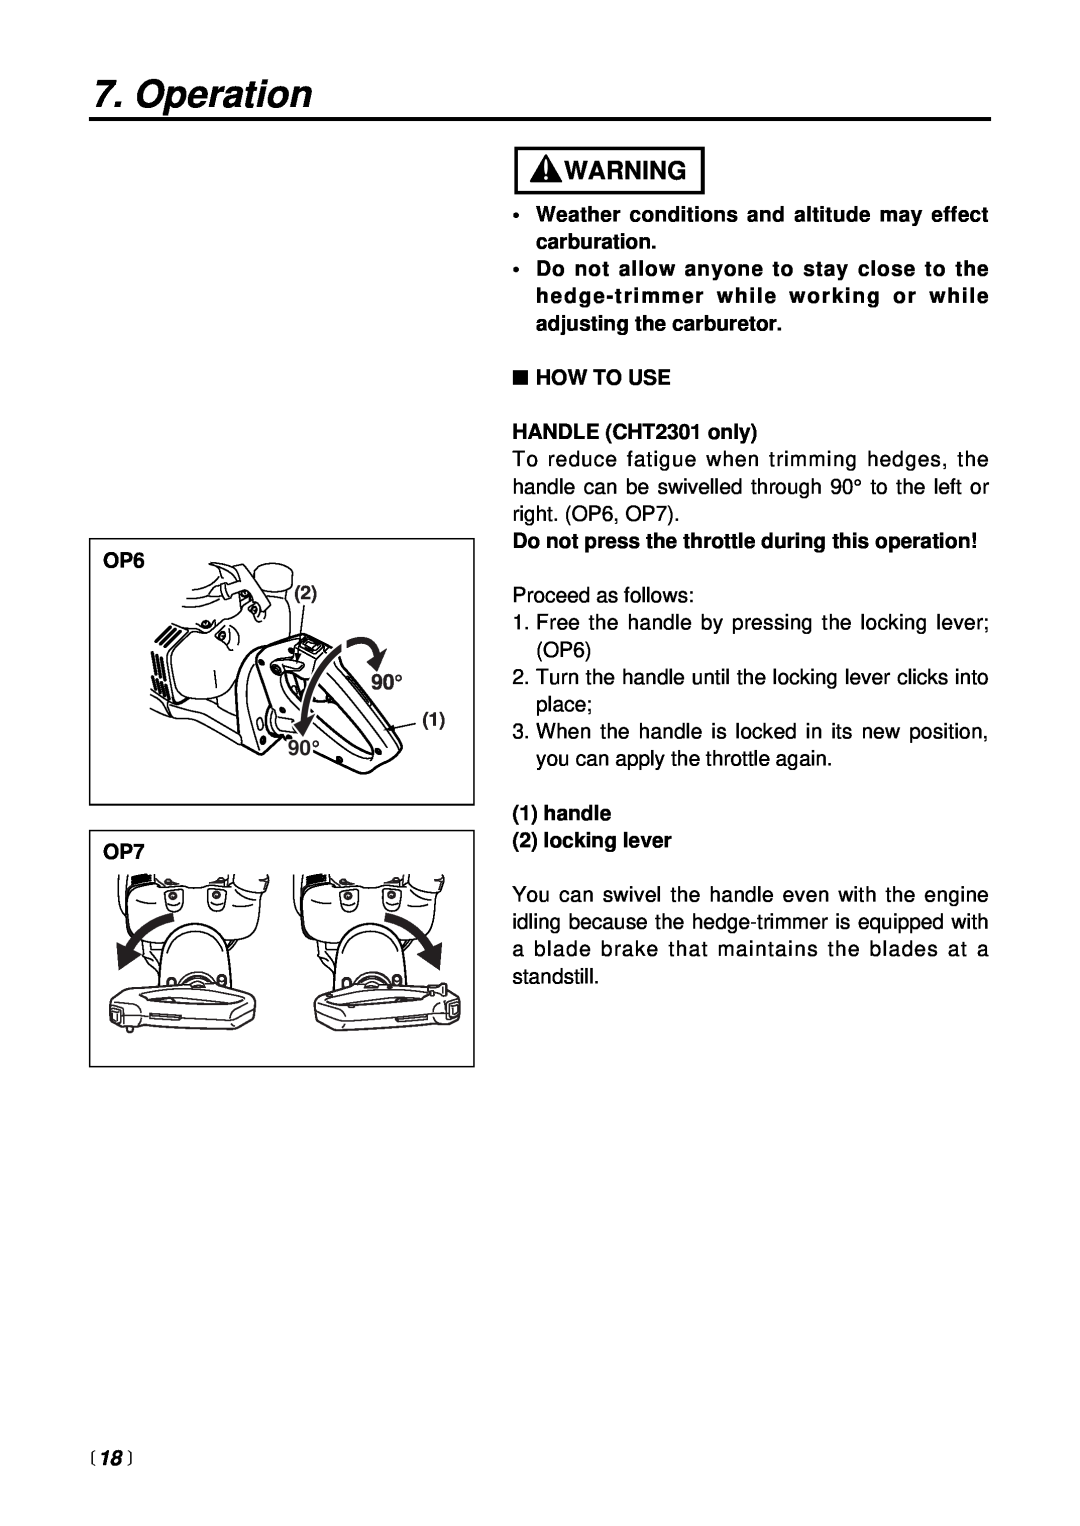 RedMax CHT2301 manual  18 , Operation, Weather conditions and altitude may effect carburation 